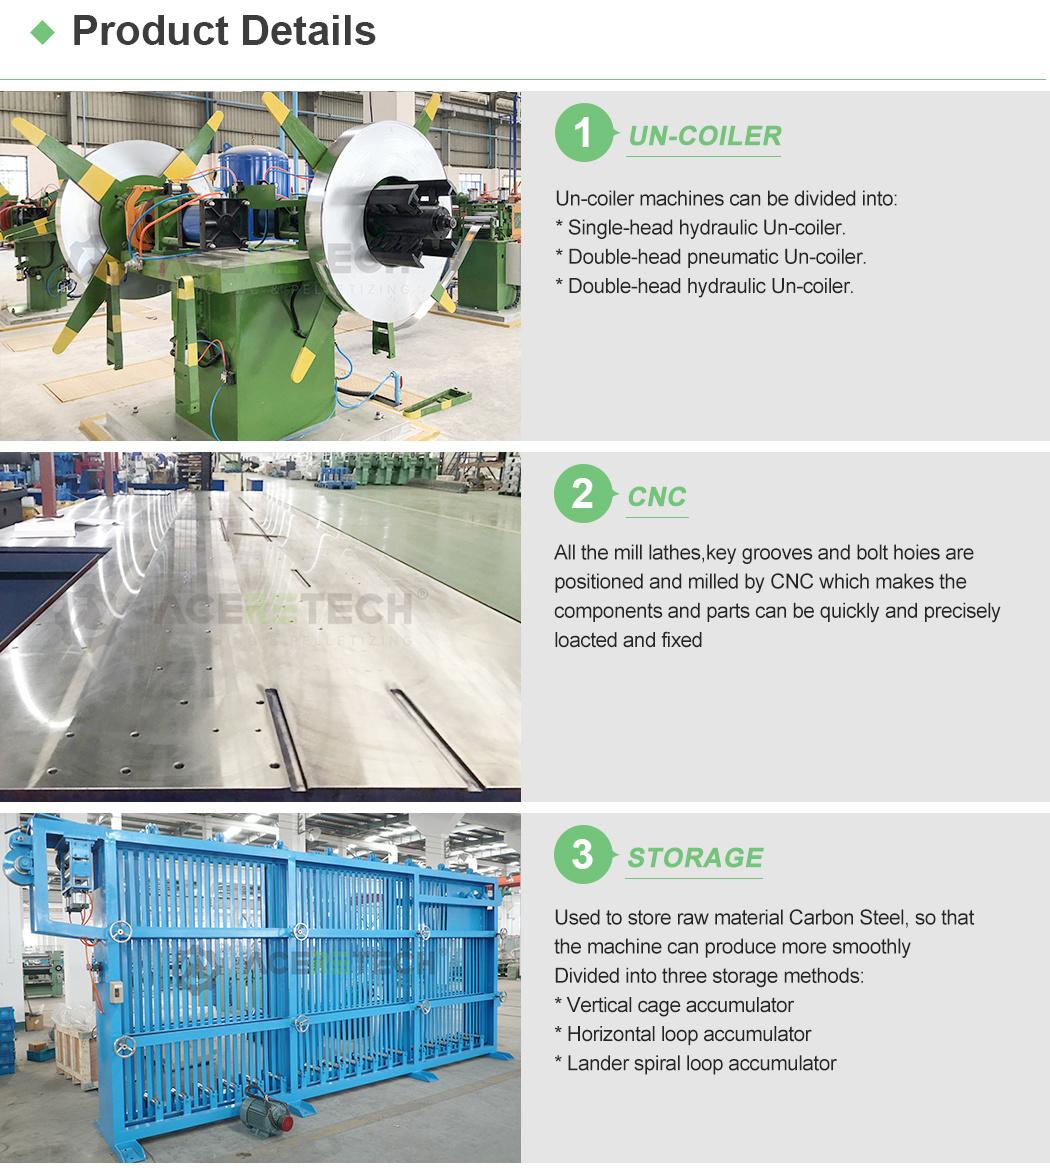 Low Noise Aluminium Tube Production Line for Different Shapes of Steel Pipes